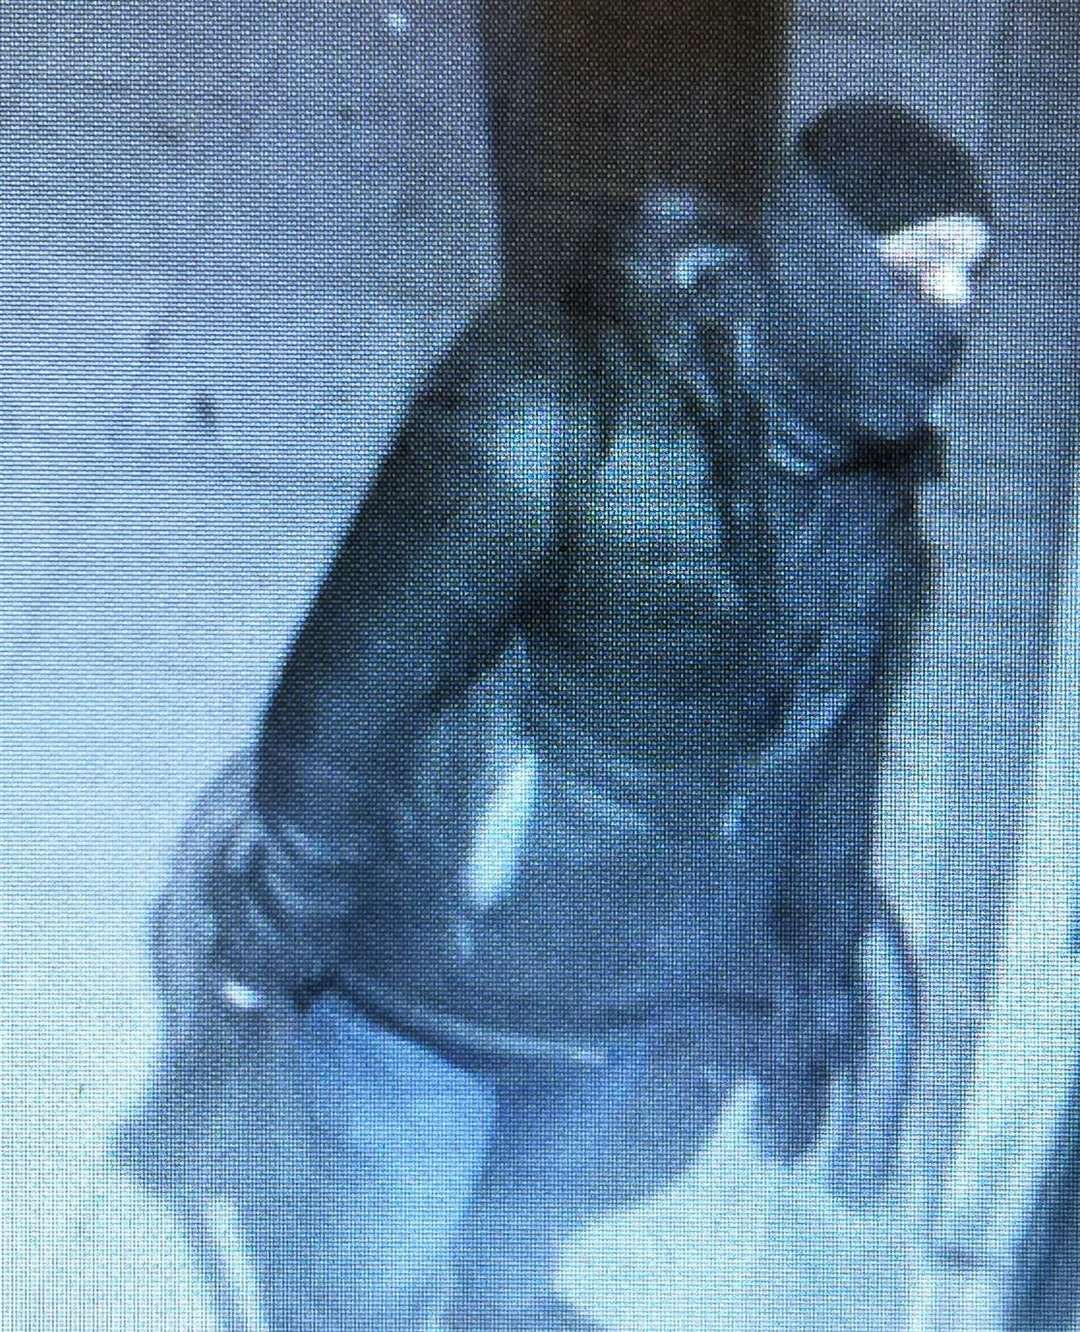 Police issued images of the suspect.